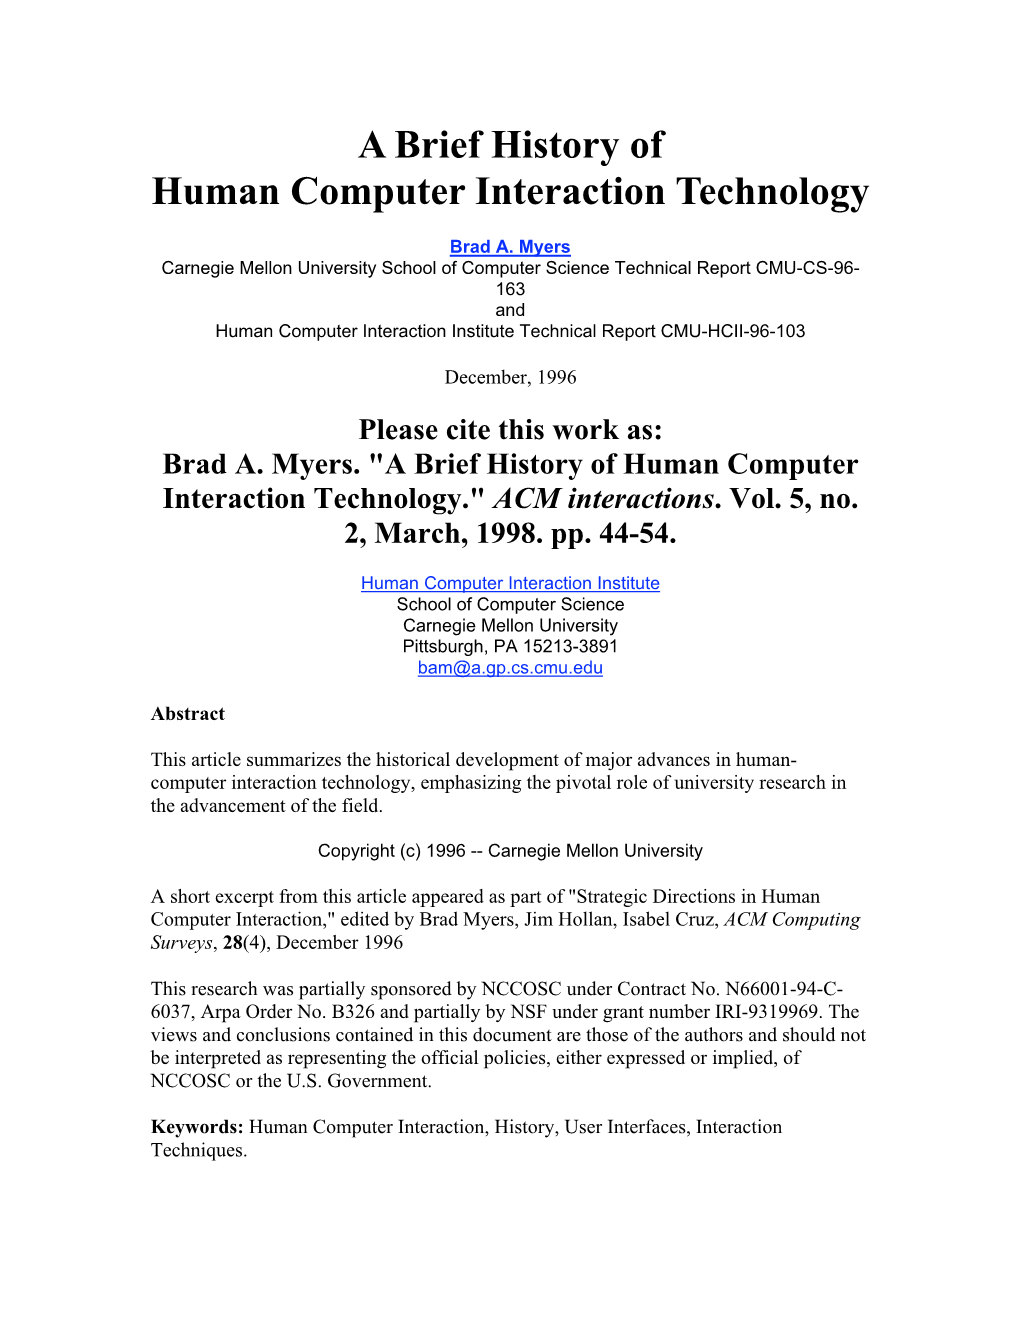 A Brief History of Human Computer Interaction Technology